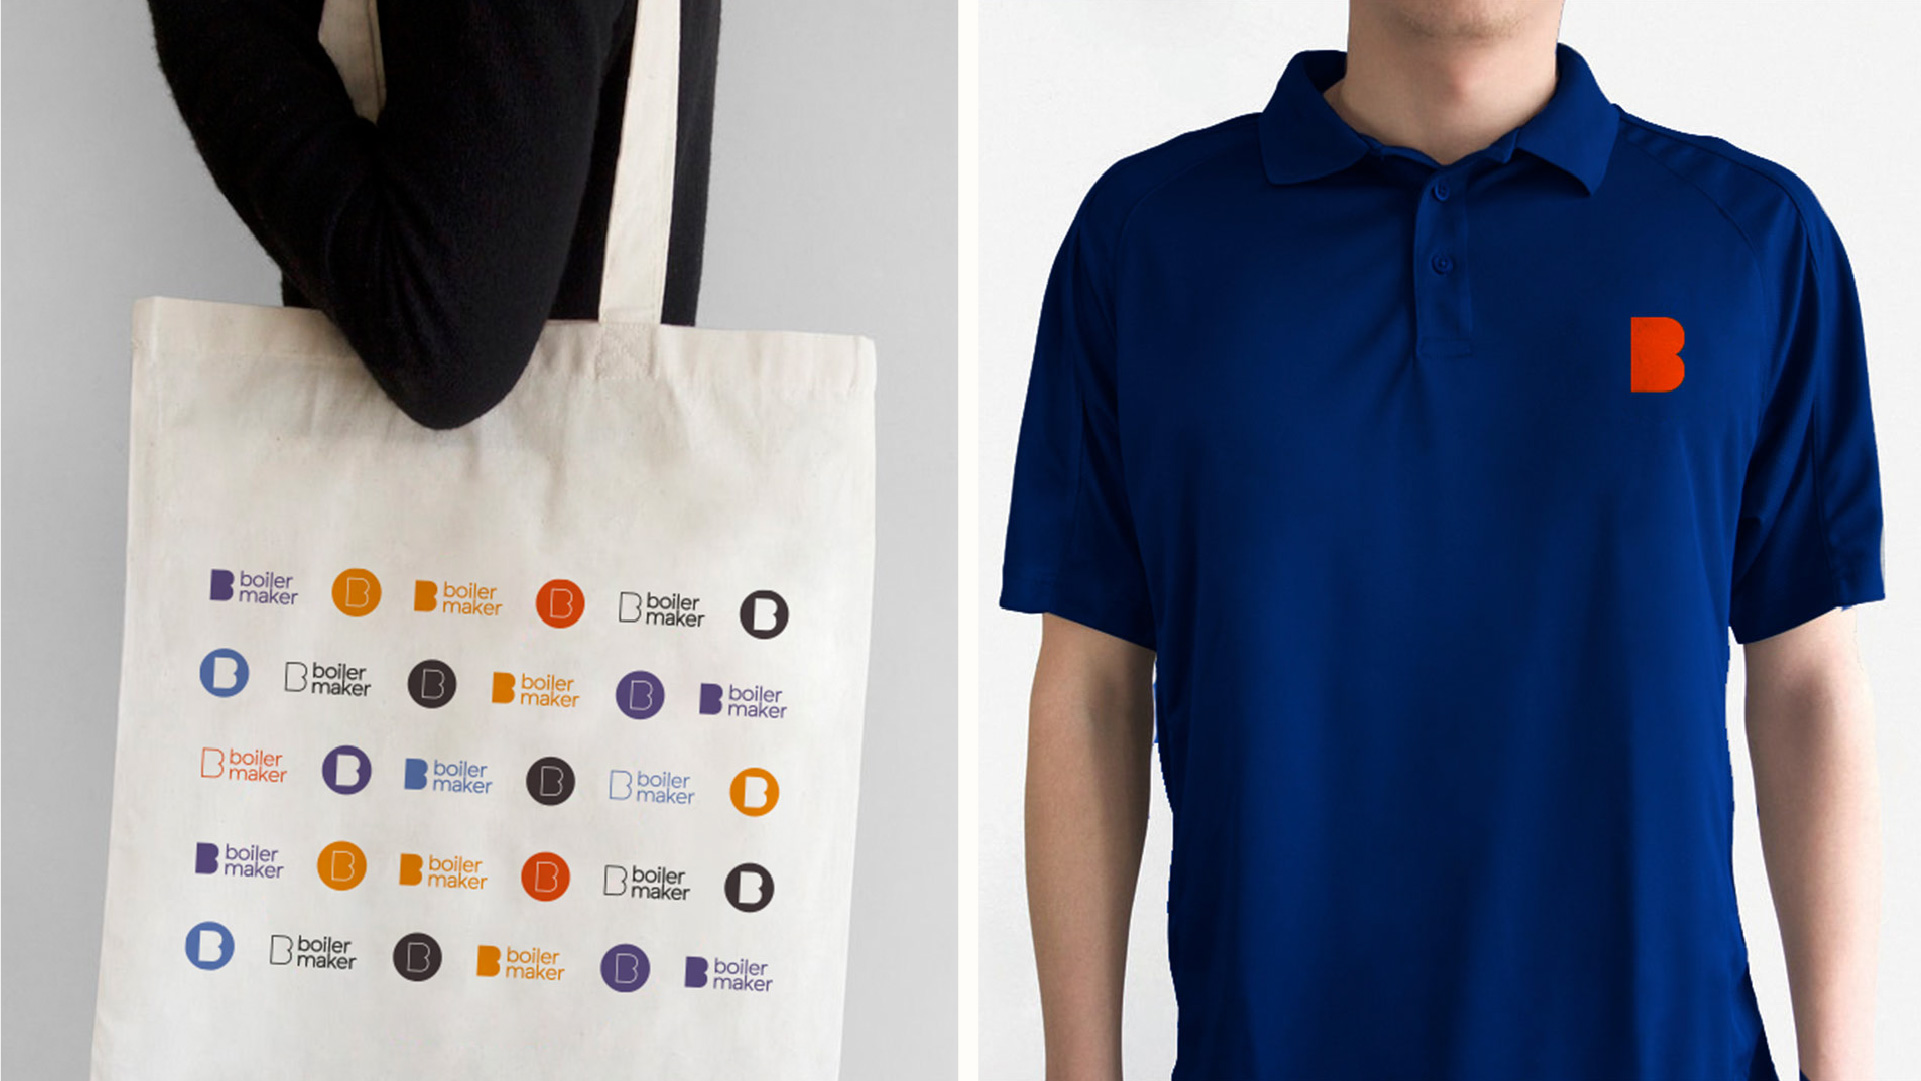 printed collateral like and silk screen printed totebag and a branded polo